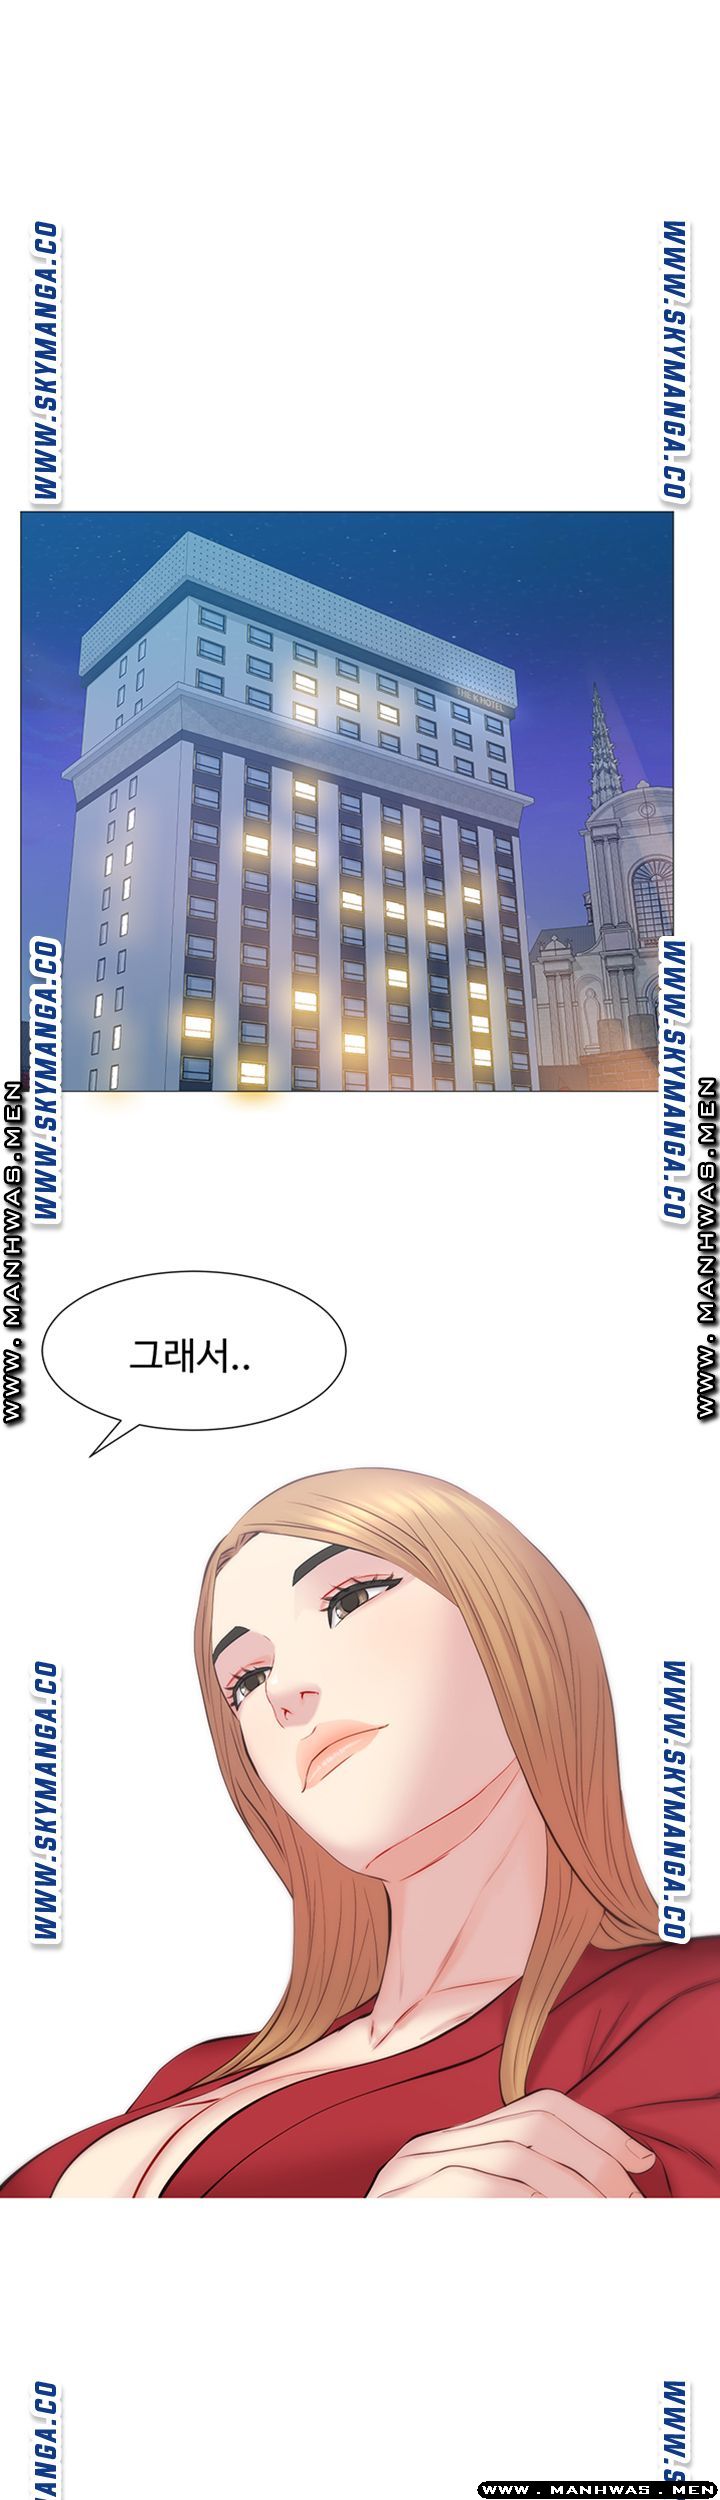 Gamble Raw - Chapter 32 Page 1